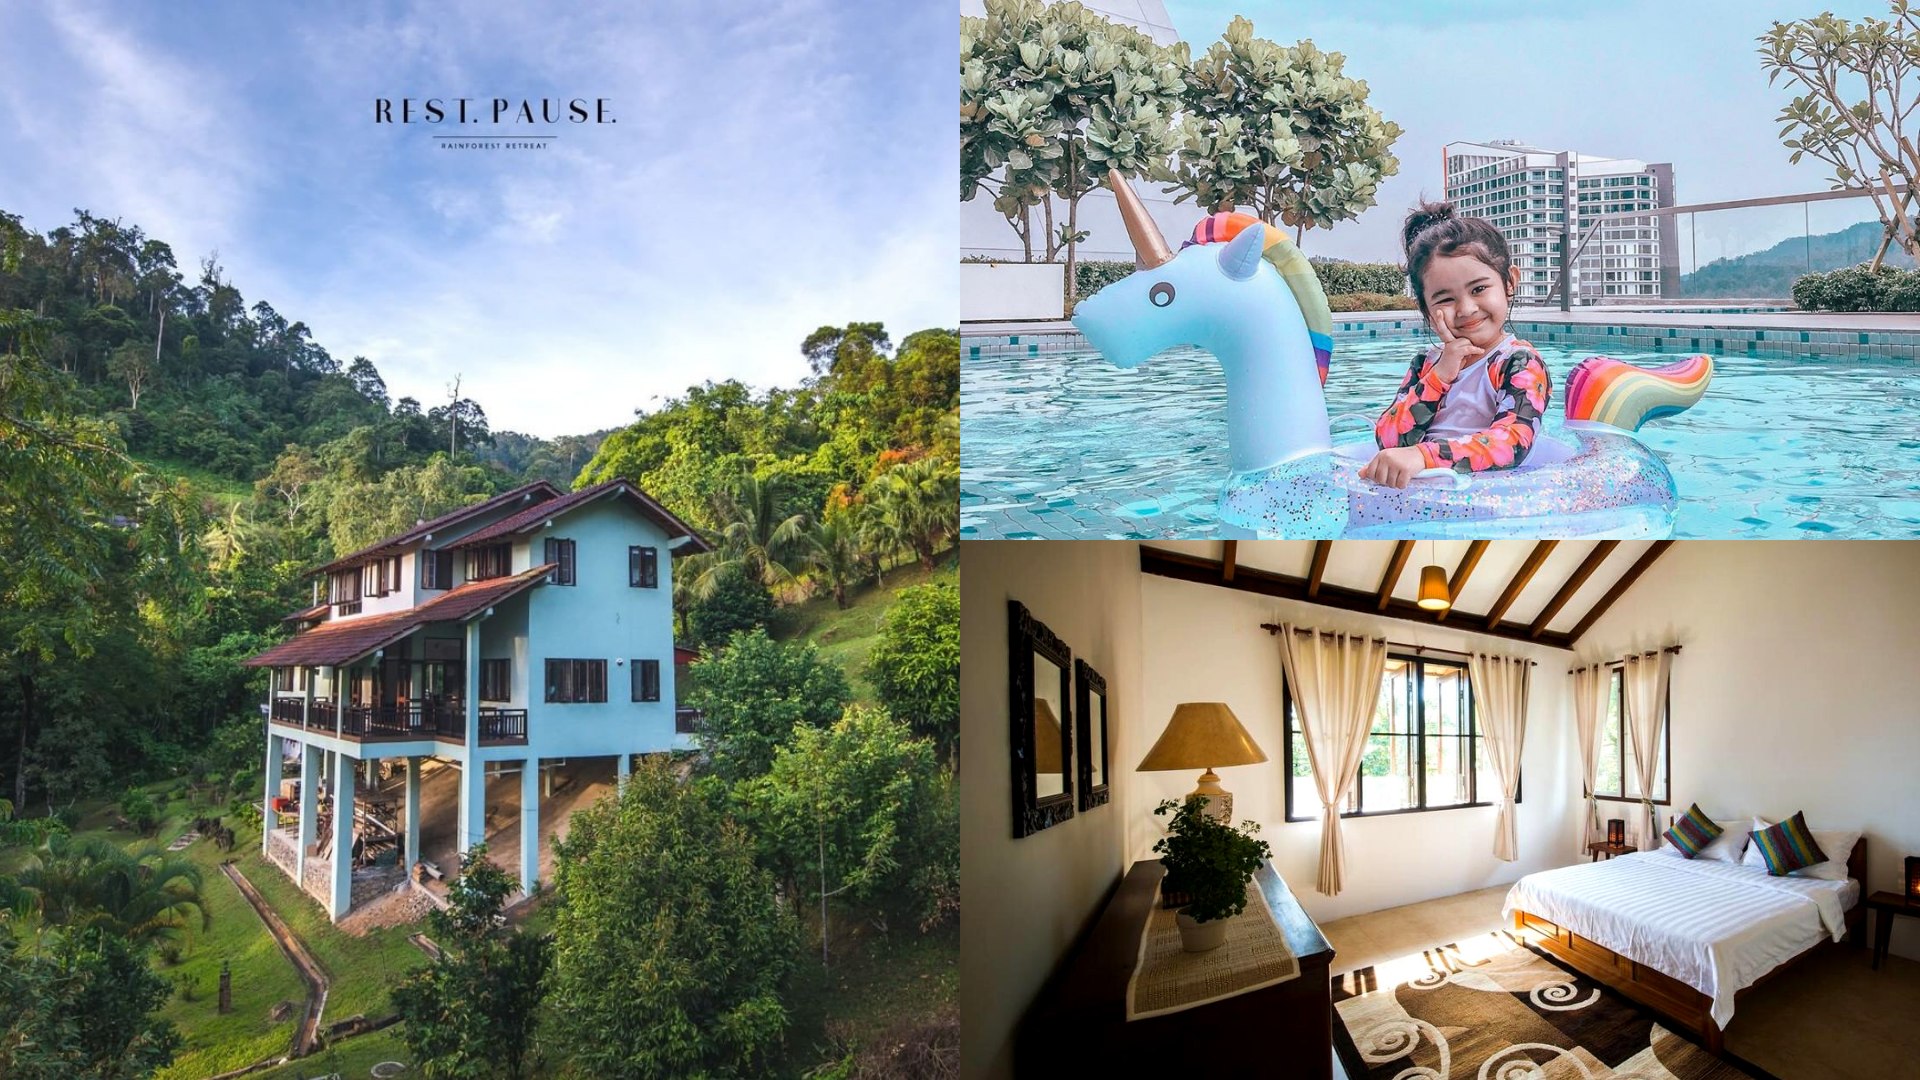 8 Family Friendly Hotels And Homestays Near Genting Highlands For A Chilly Family Getaway Klook Travel Blog